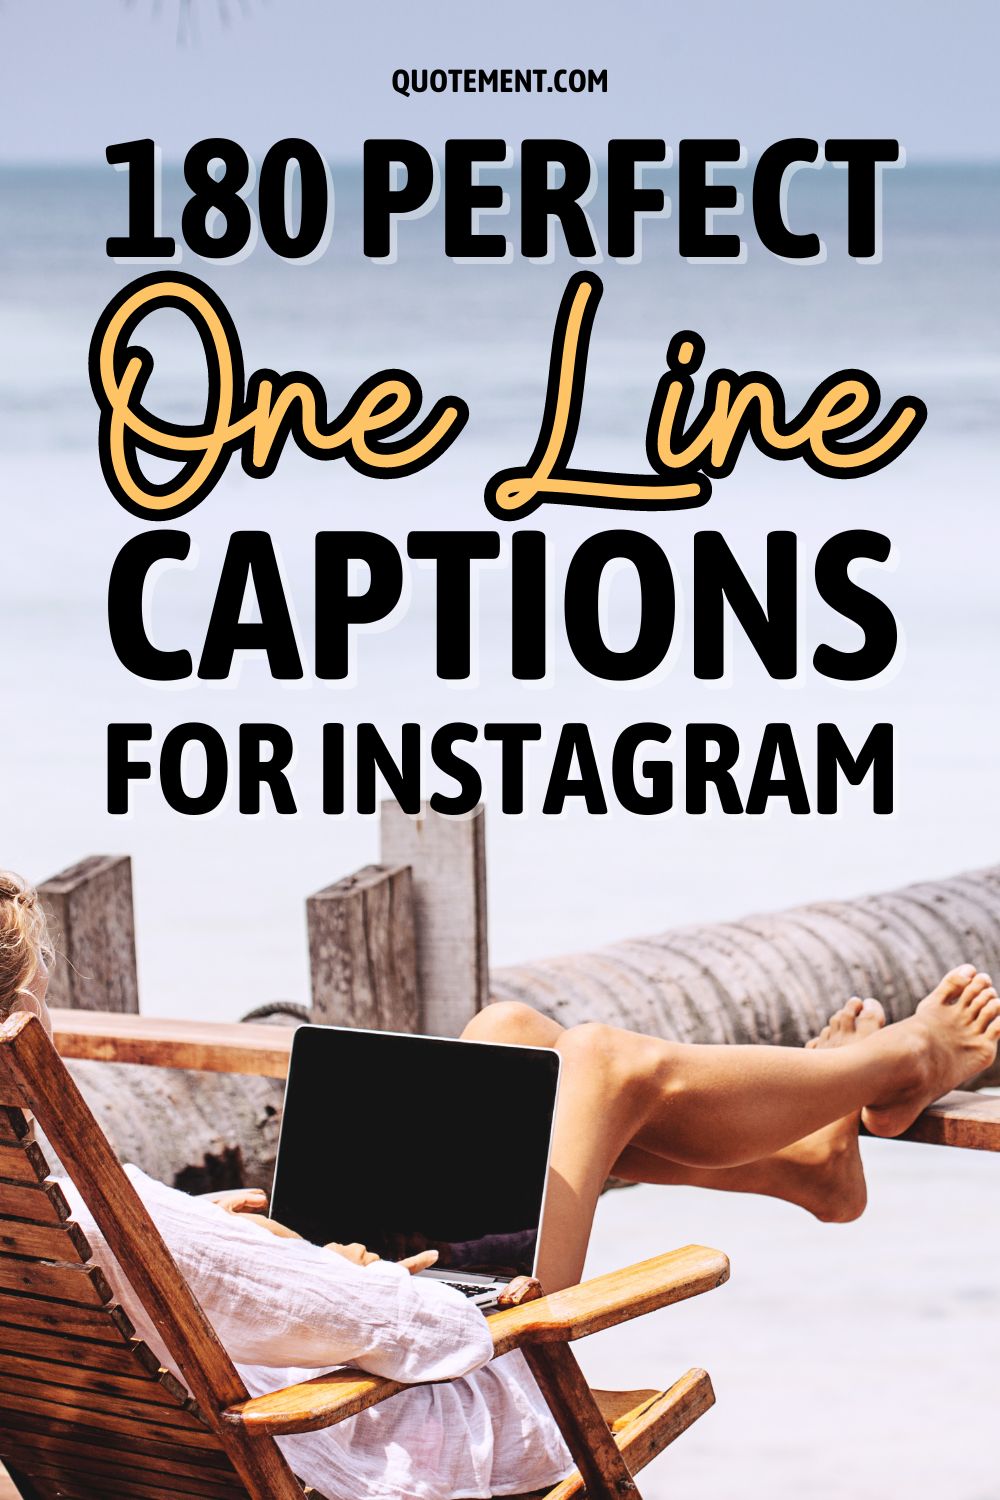 180 Perfect One Line Captions For Instagram